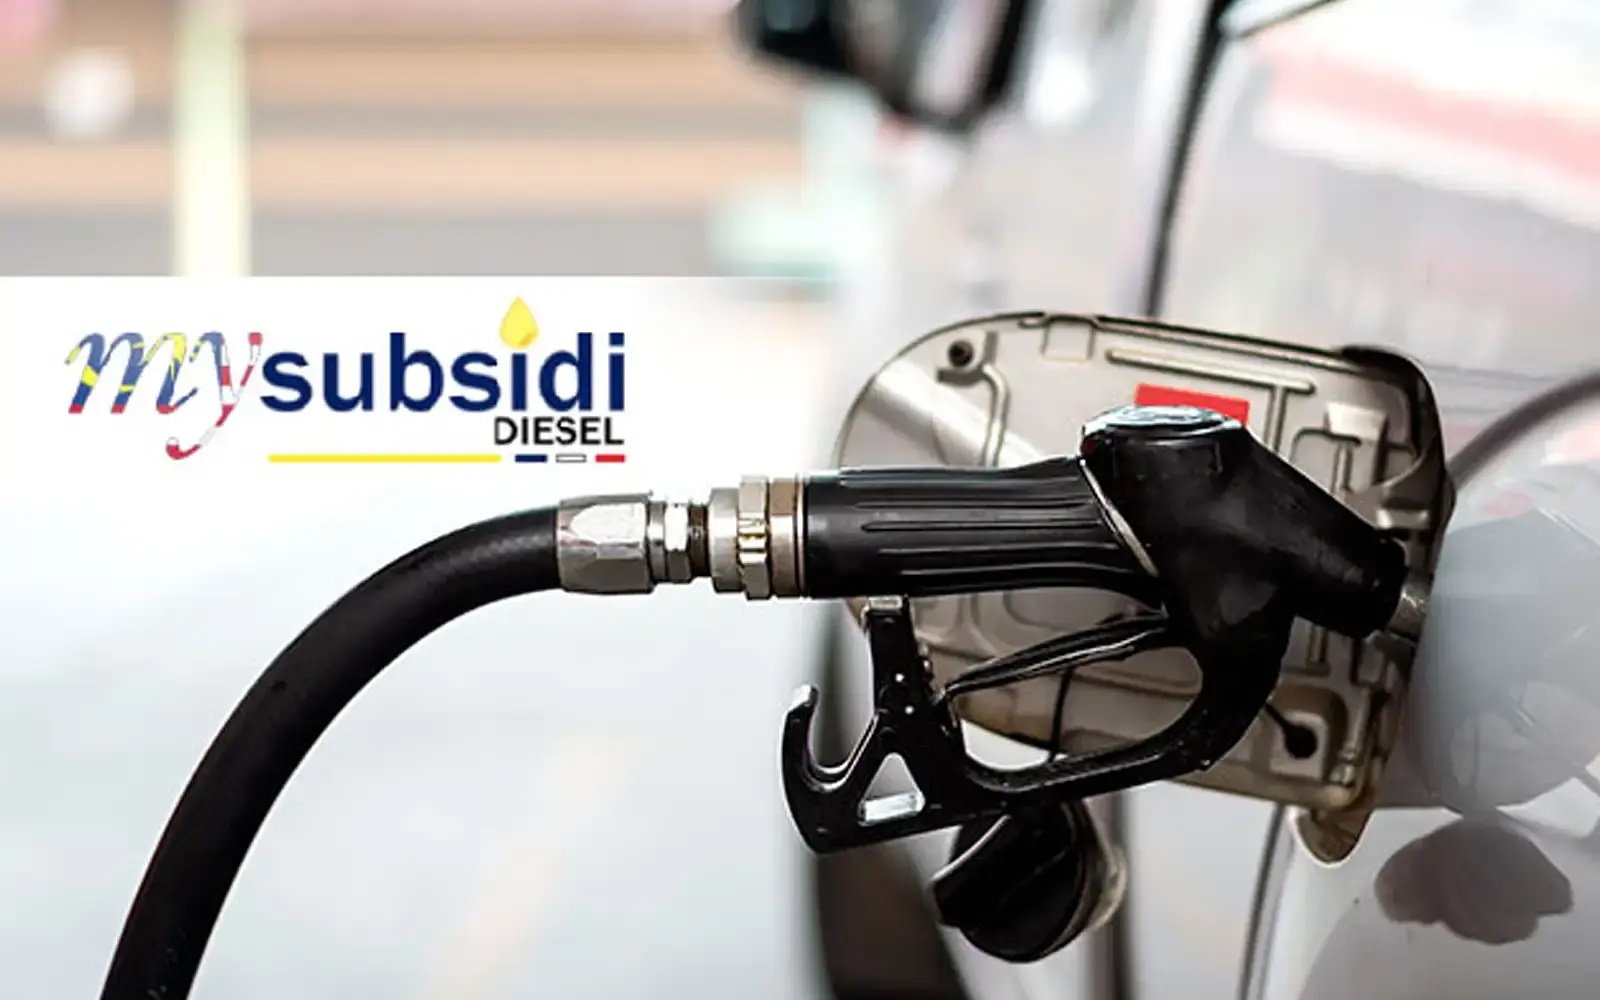 Many unaware they must apply for fleet cards to get subsidised diesel